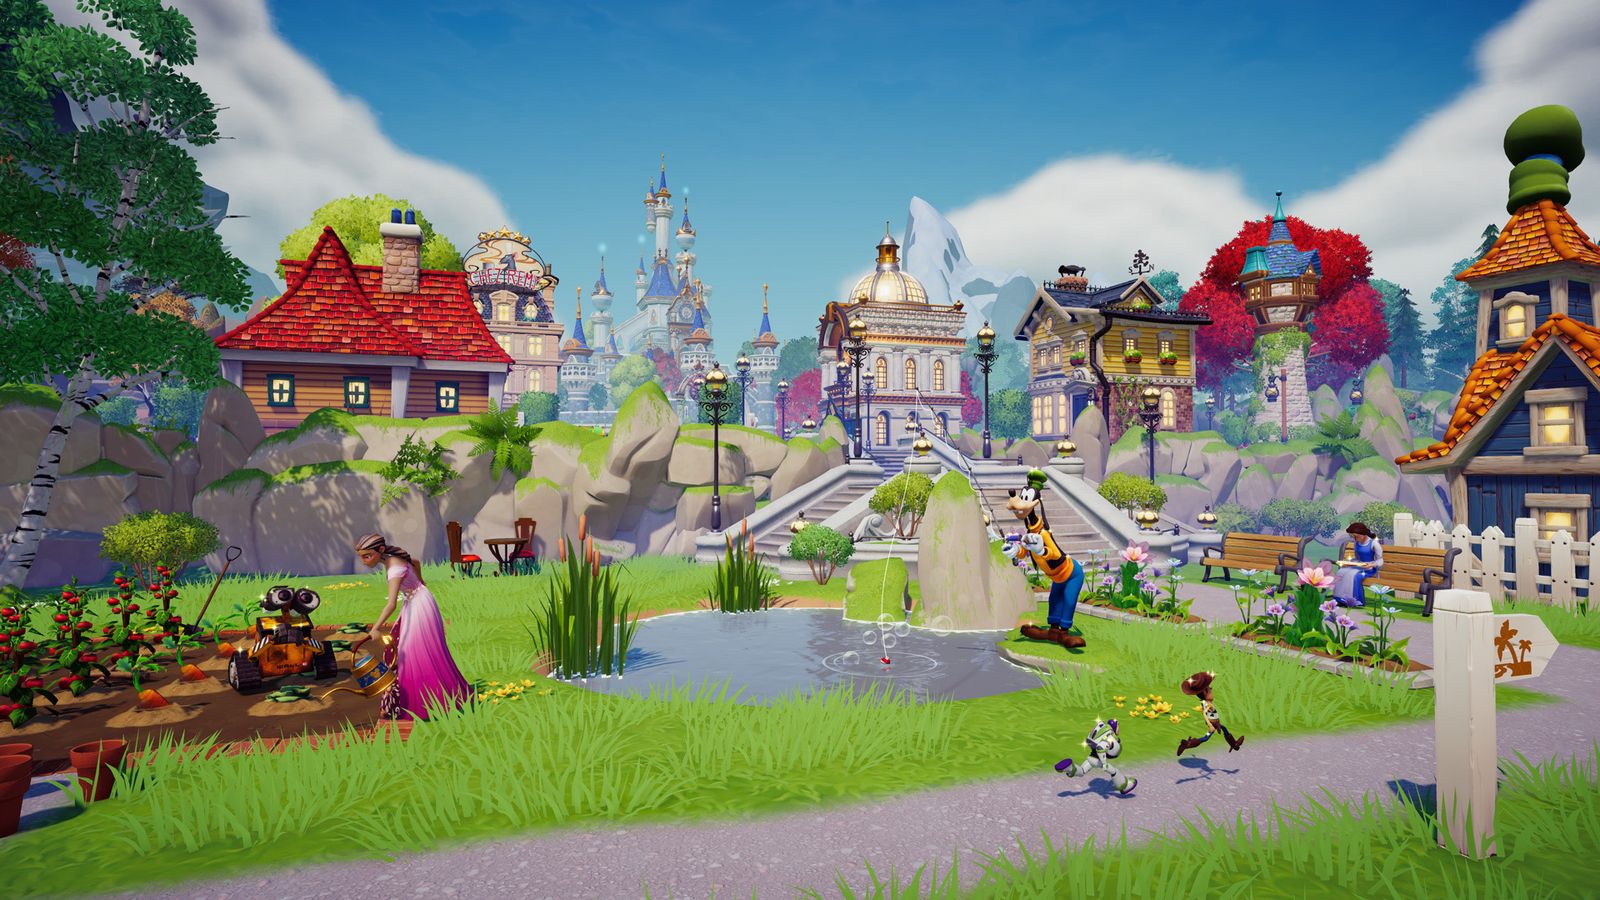 A village scene, with the Disney castle in the background, Wall-E and a princess watering a vegetable patch, and Buzz Lightyear chasing Woody. - Disney Dreamlight Valley cloud save error